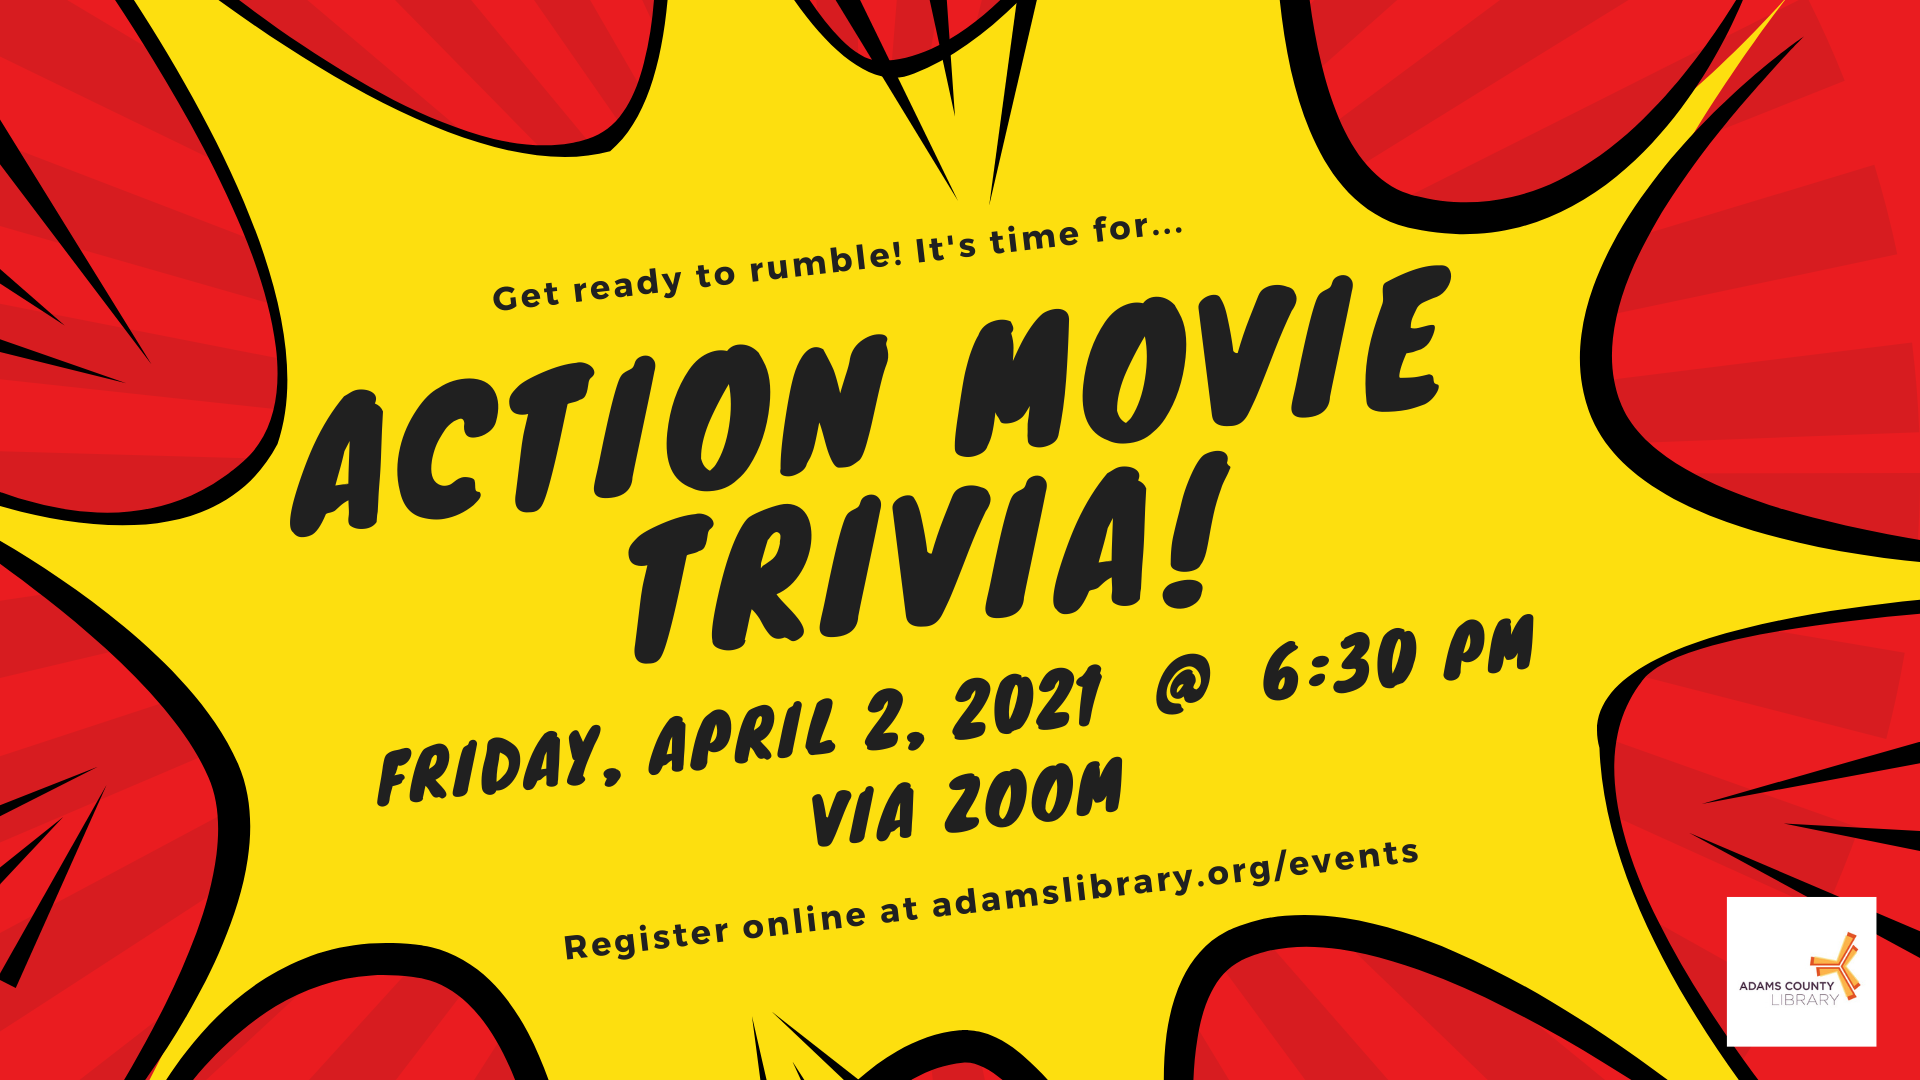 Join us on Friday, April 2, 2021 at 6:30pm for Action Movie Trivia. Register online at adamslibrary.org/events to receive the Zoom link.